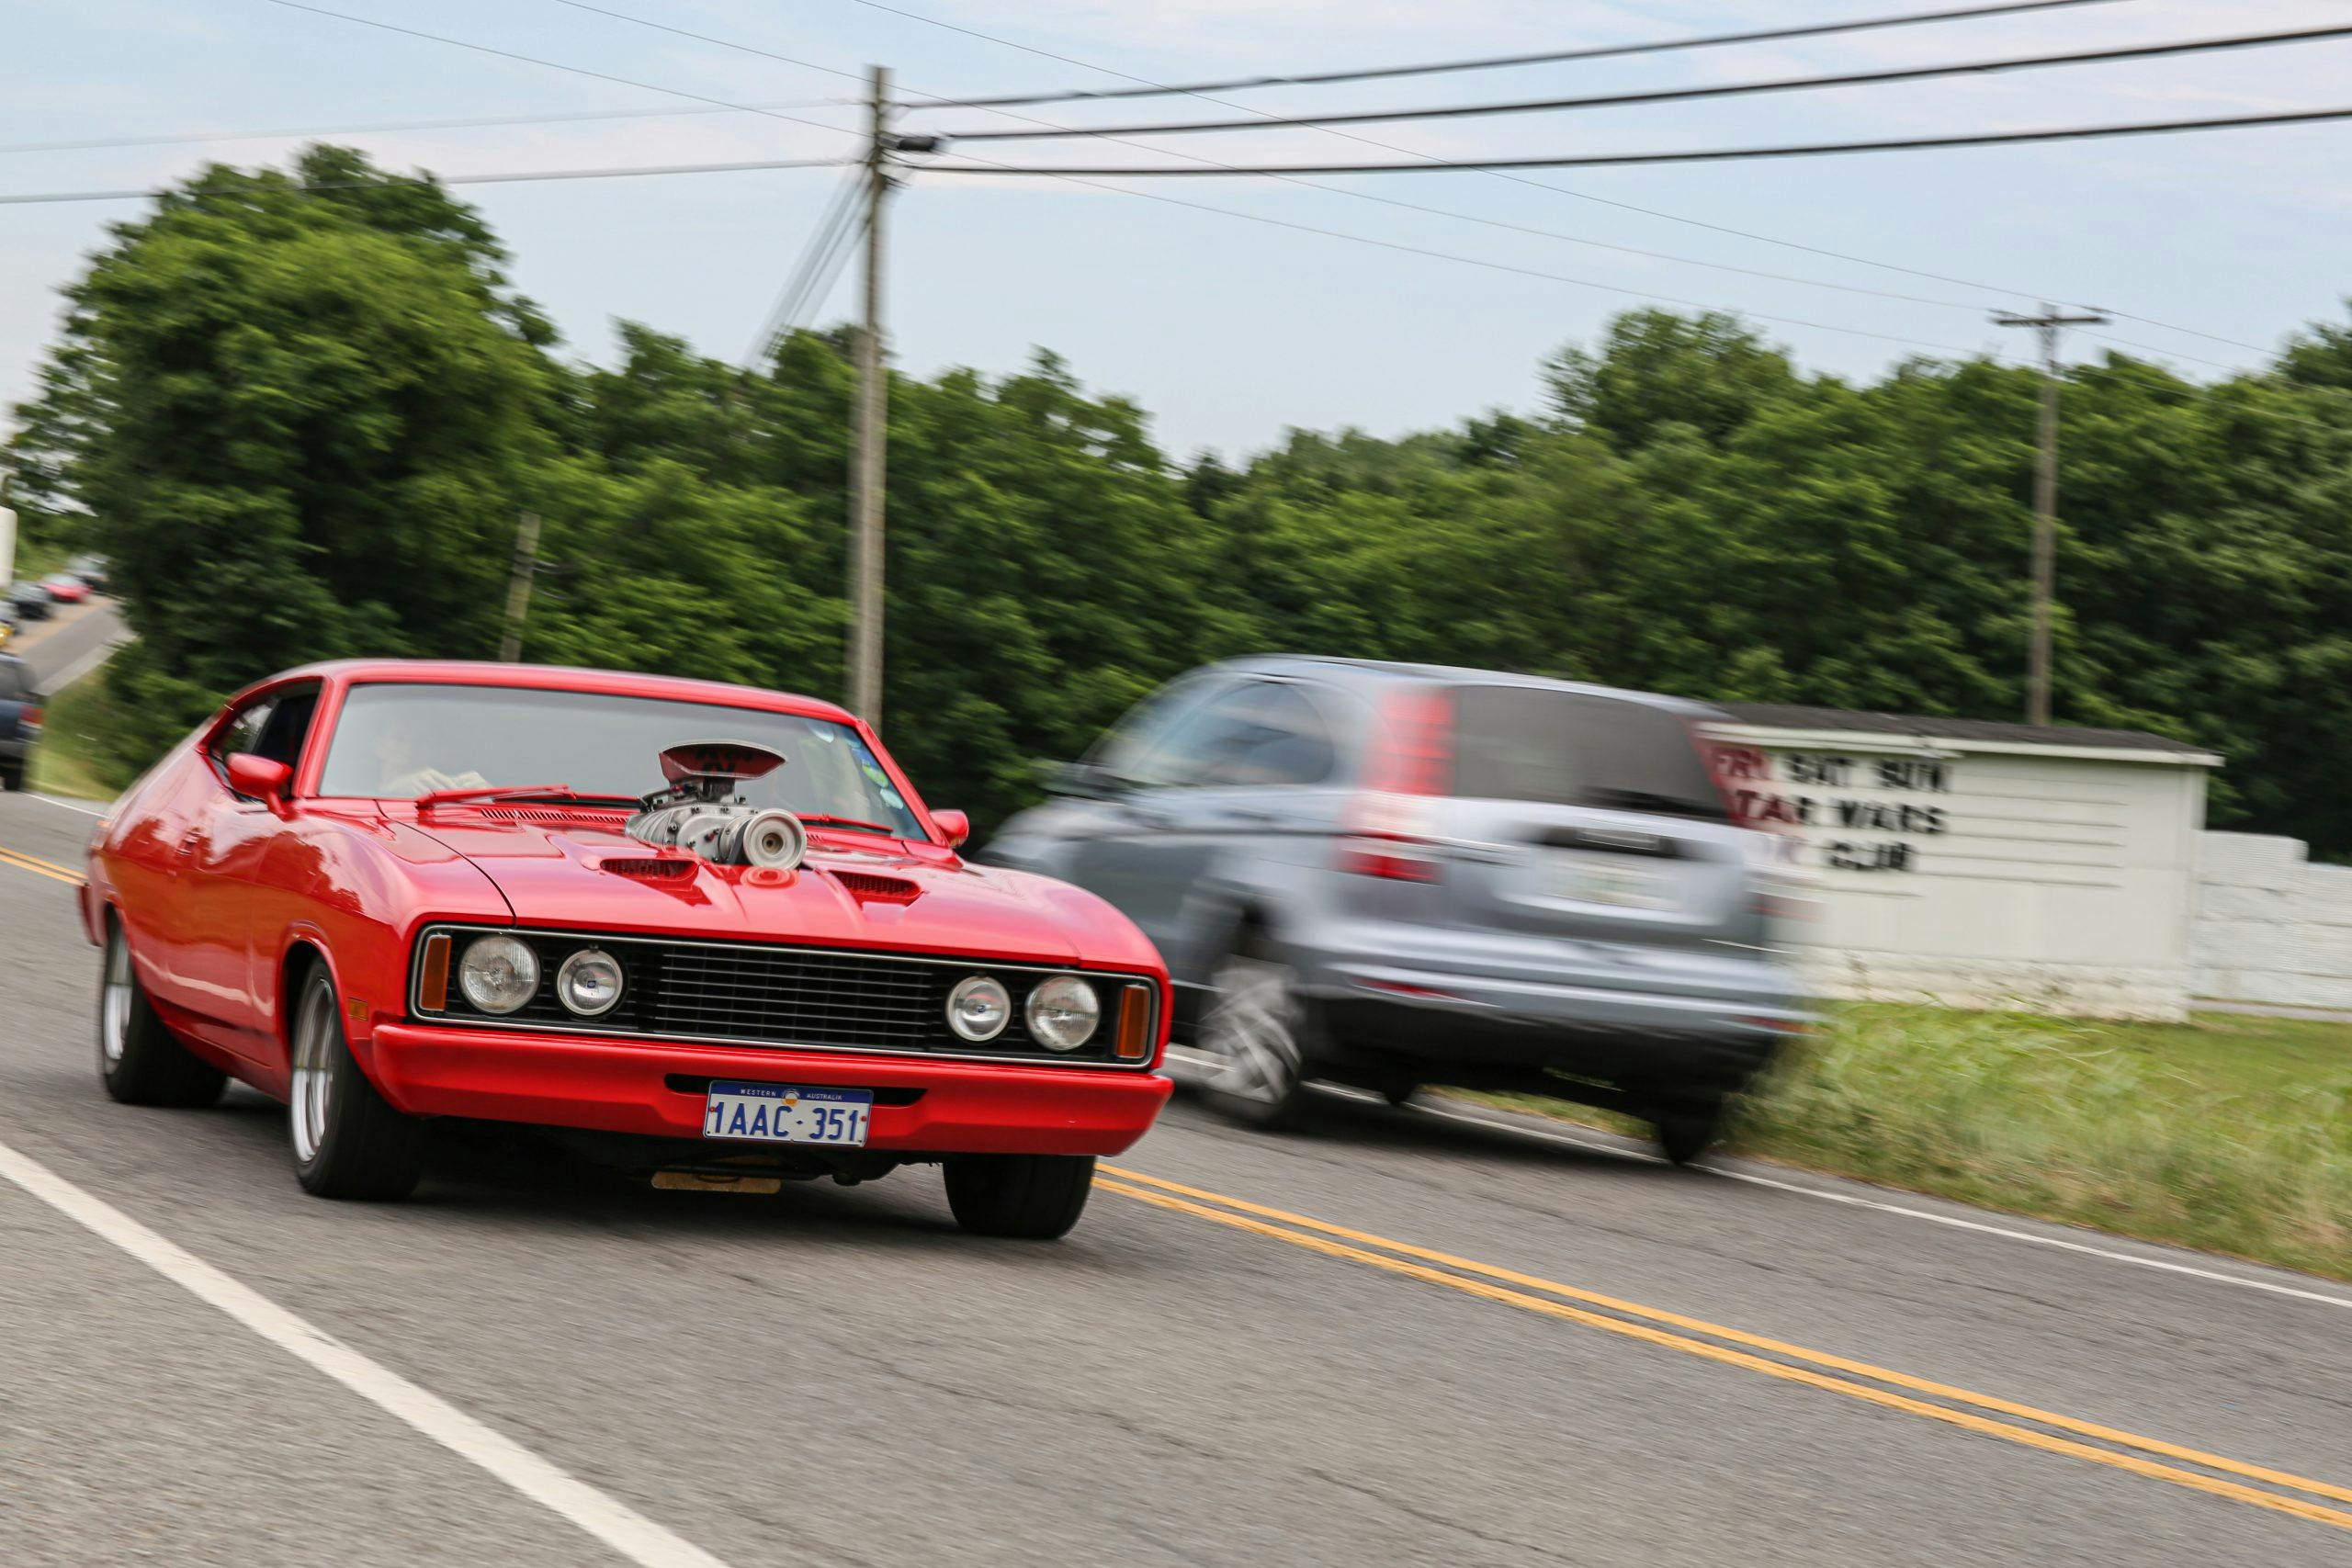 Hot rod cruises the roads during Power Tour